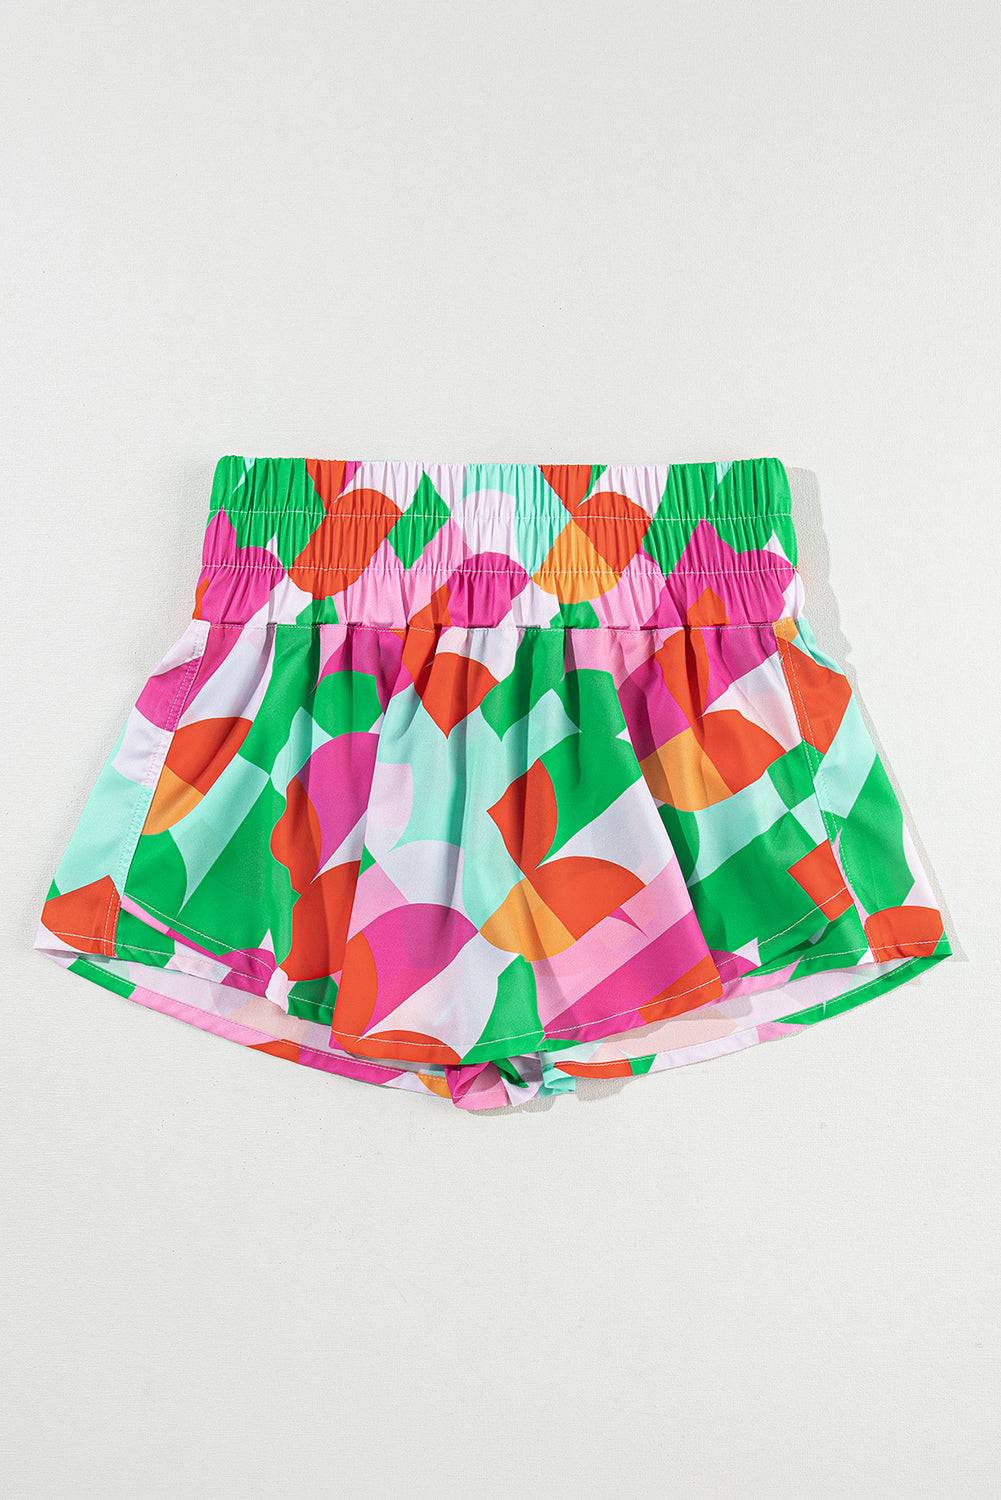 a pair of colorful shorts hanging on a wall